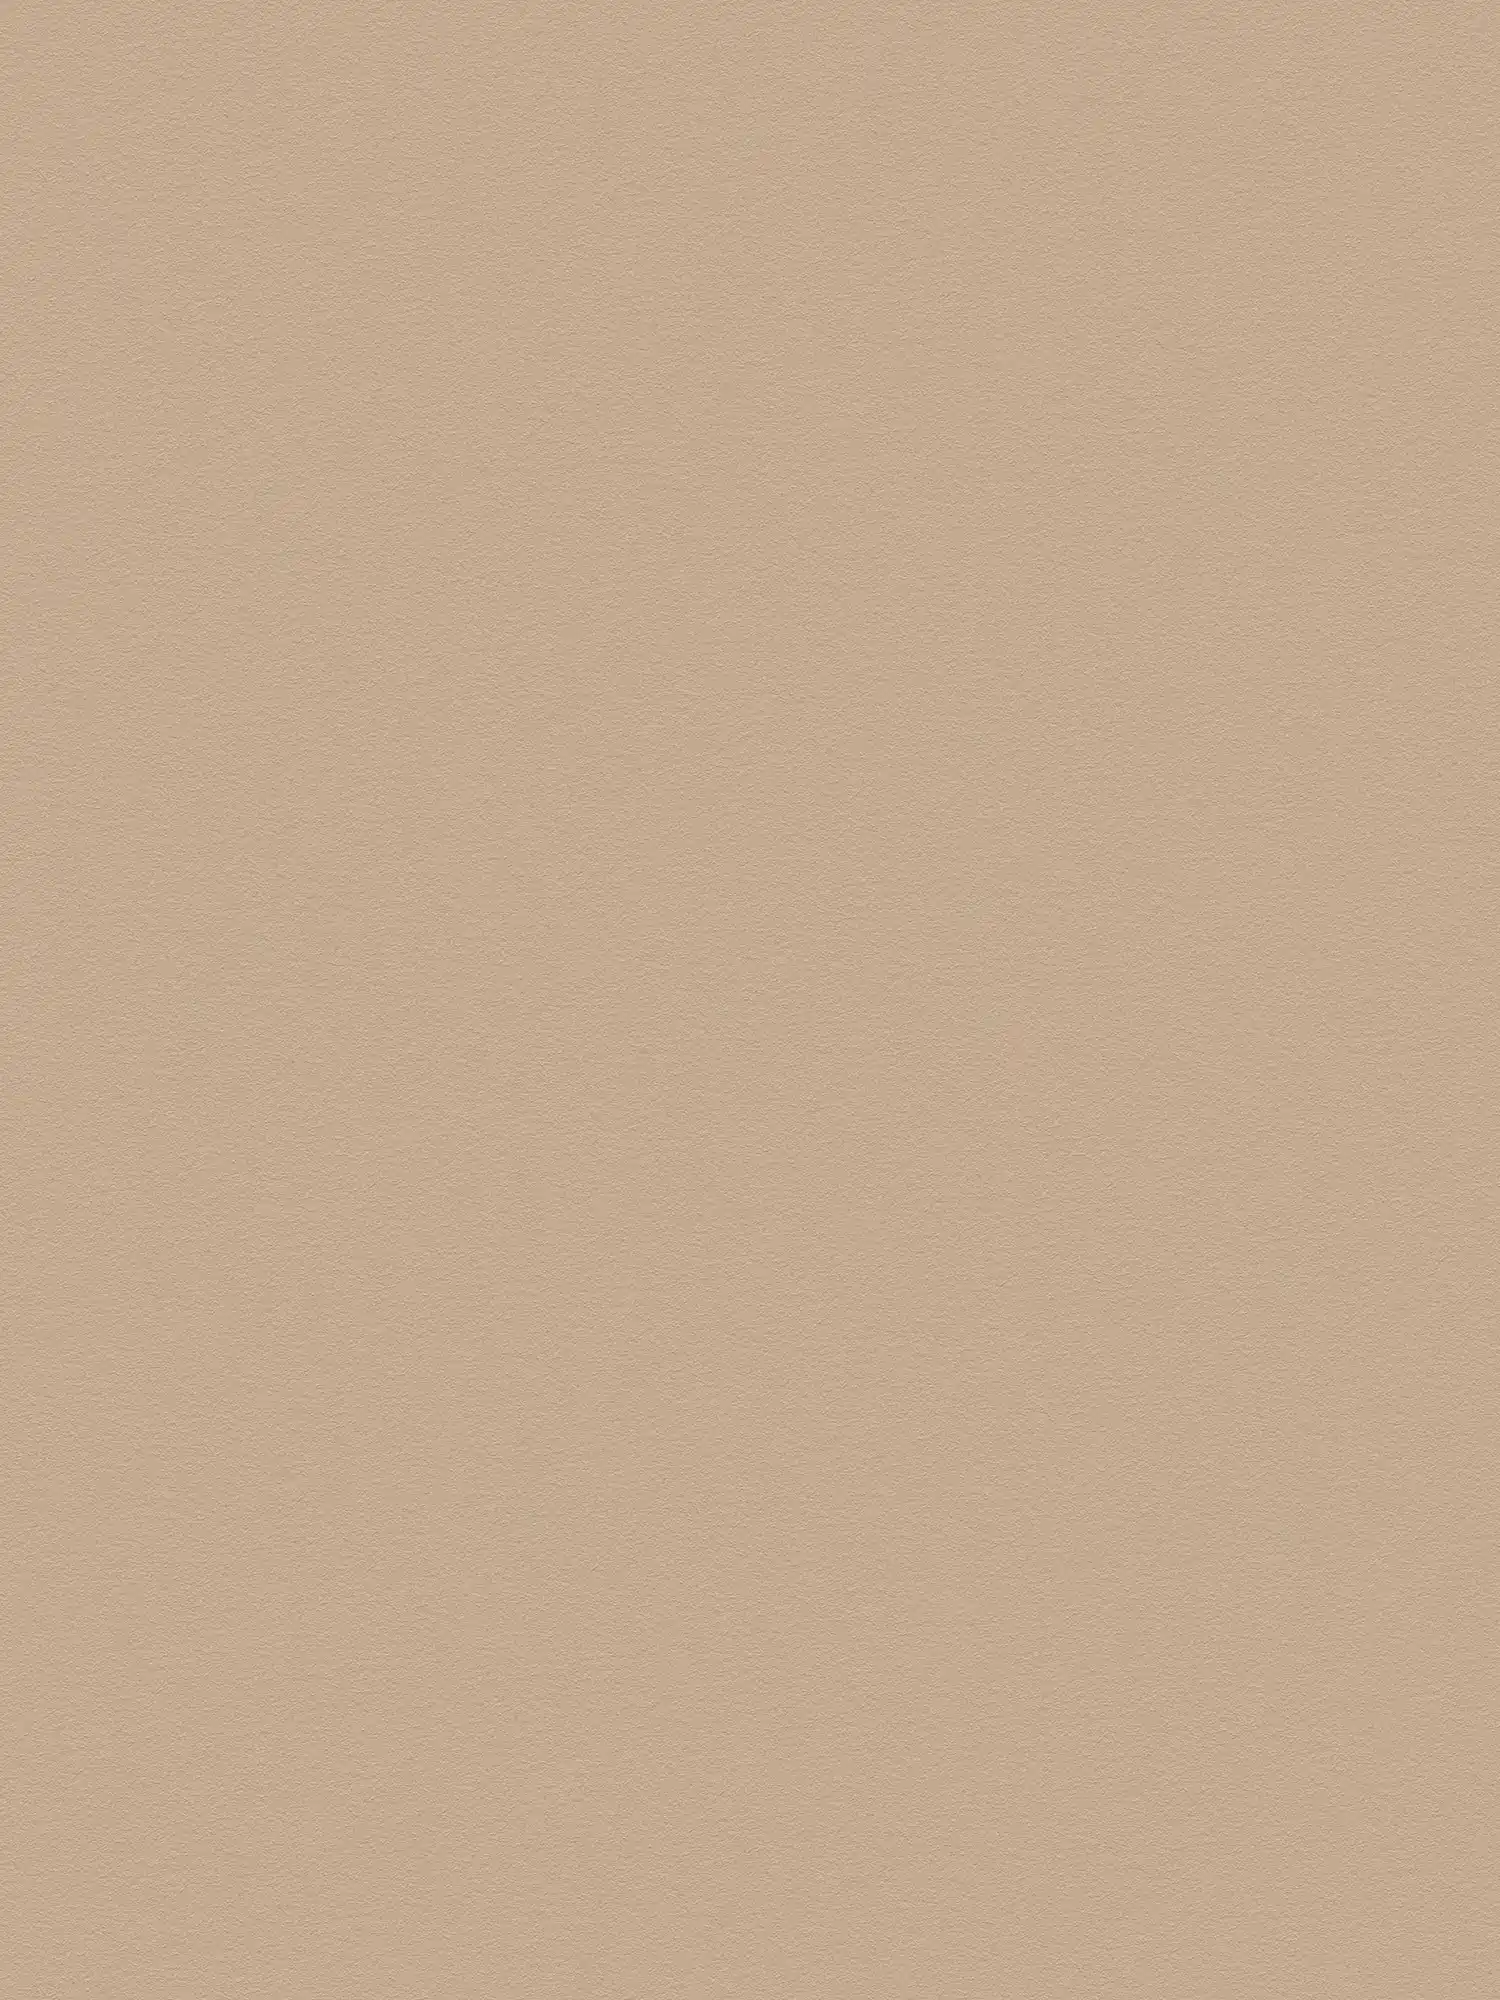 Plain wallpaper light brown with smooth surface - beige, brown
